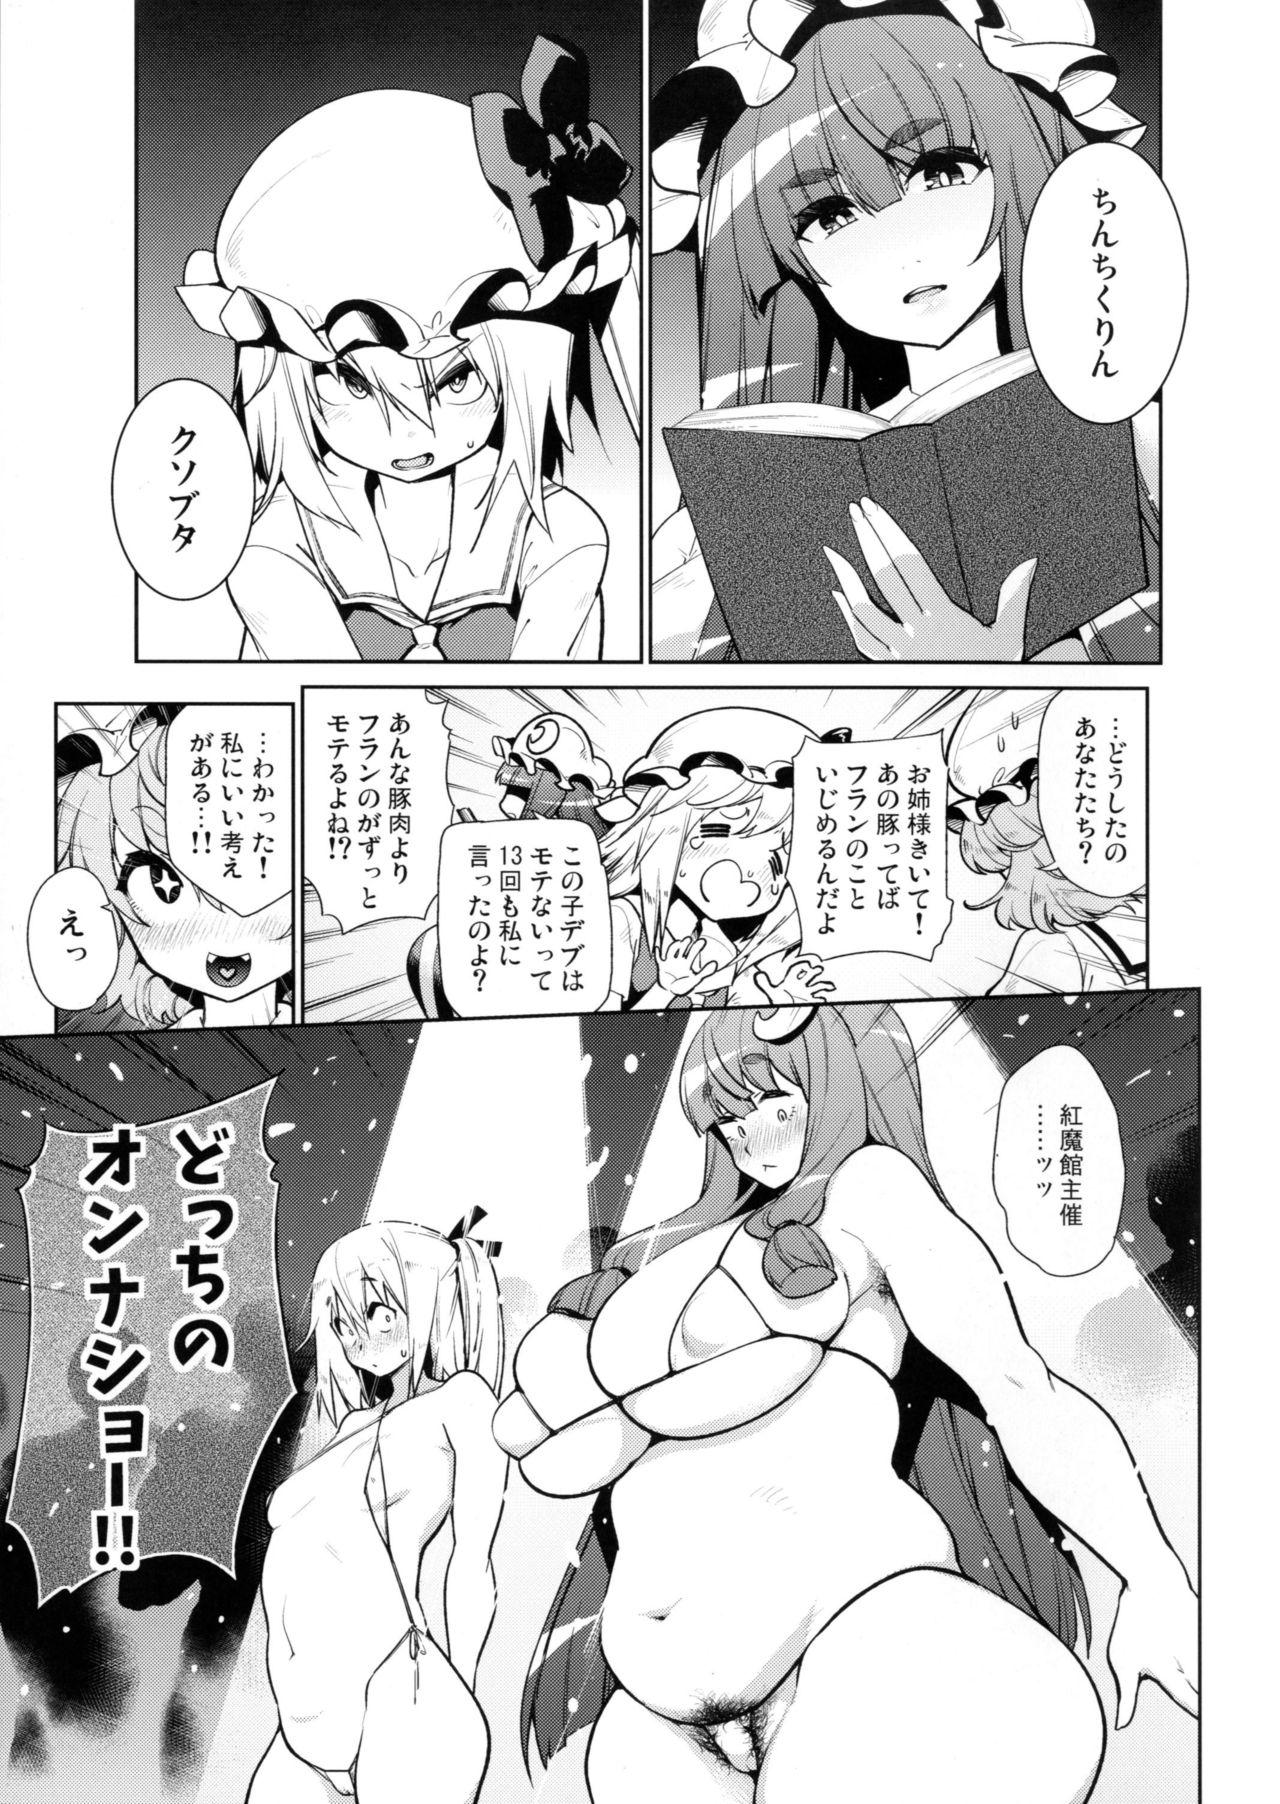 Blowjobs Docchi no Onna Show - Touhou project Whipping - Page 4